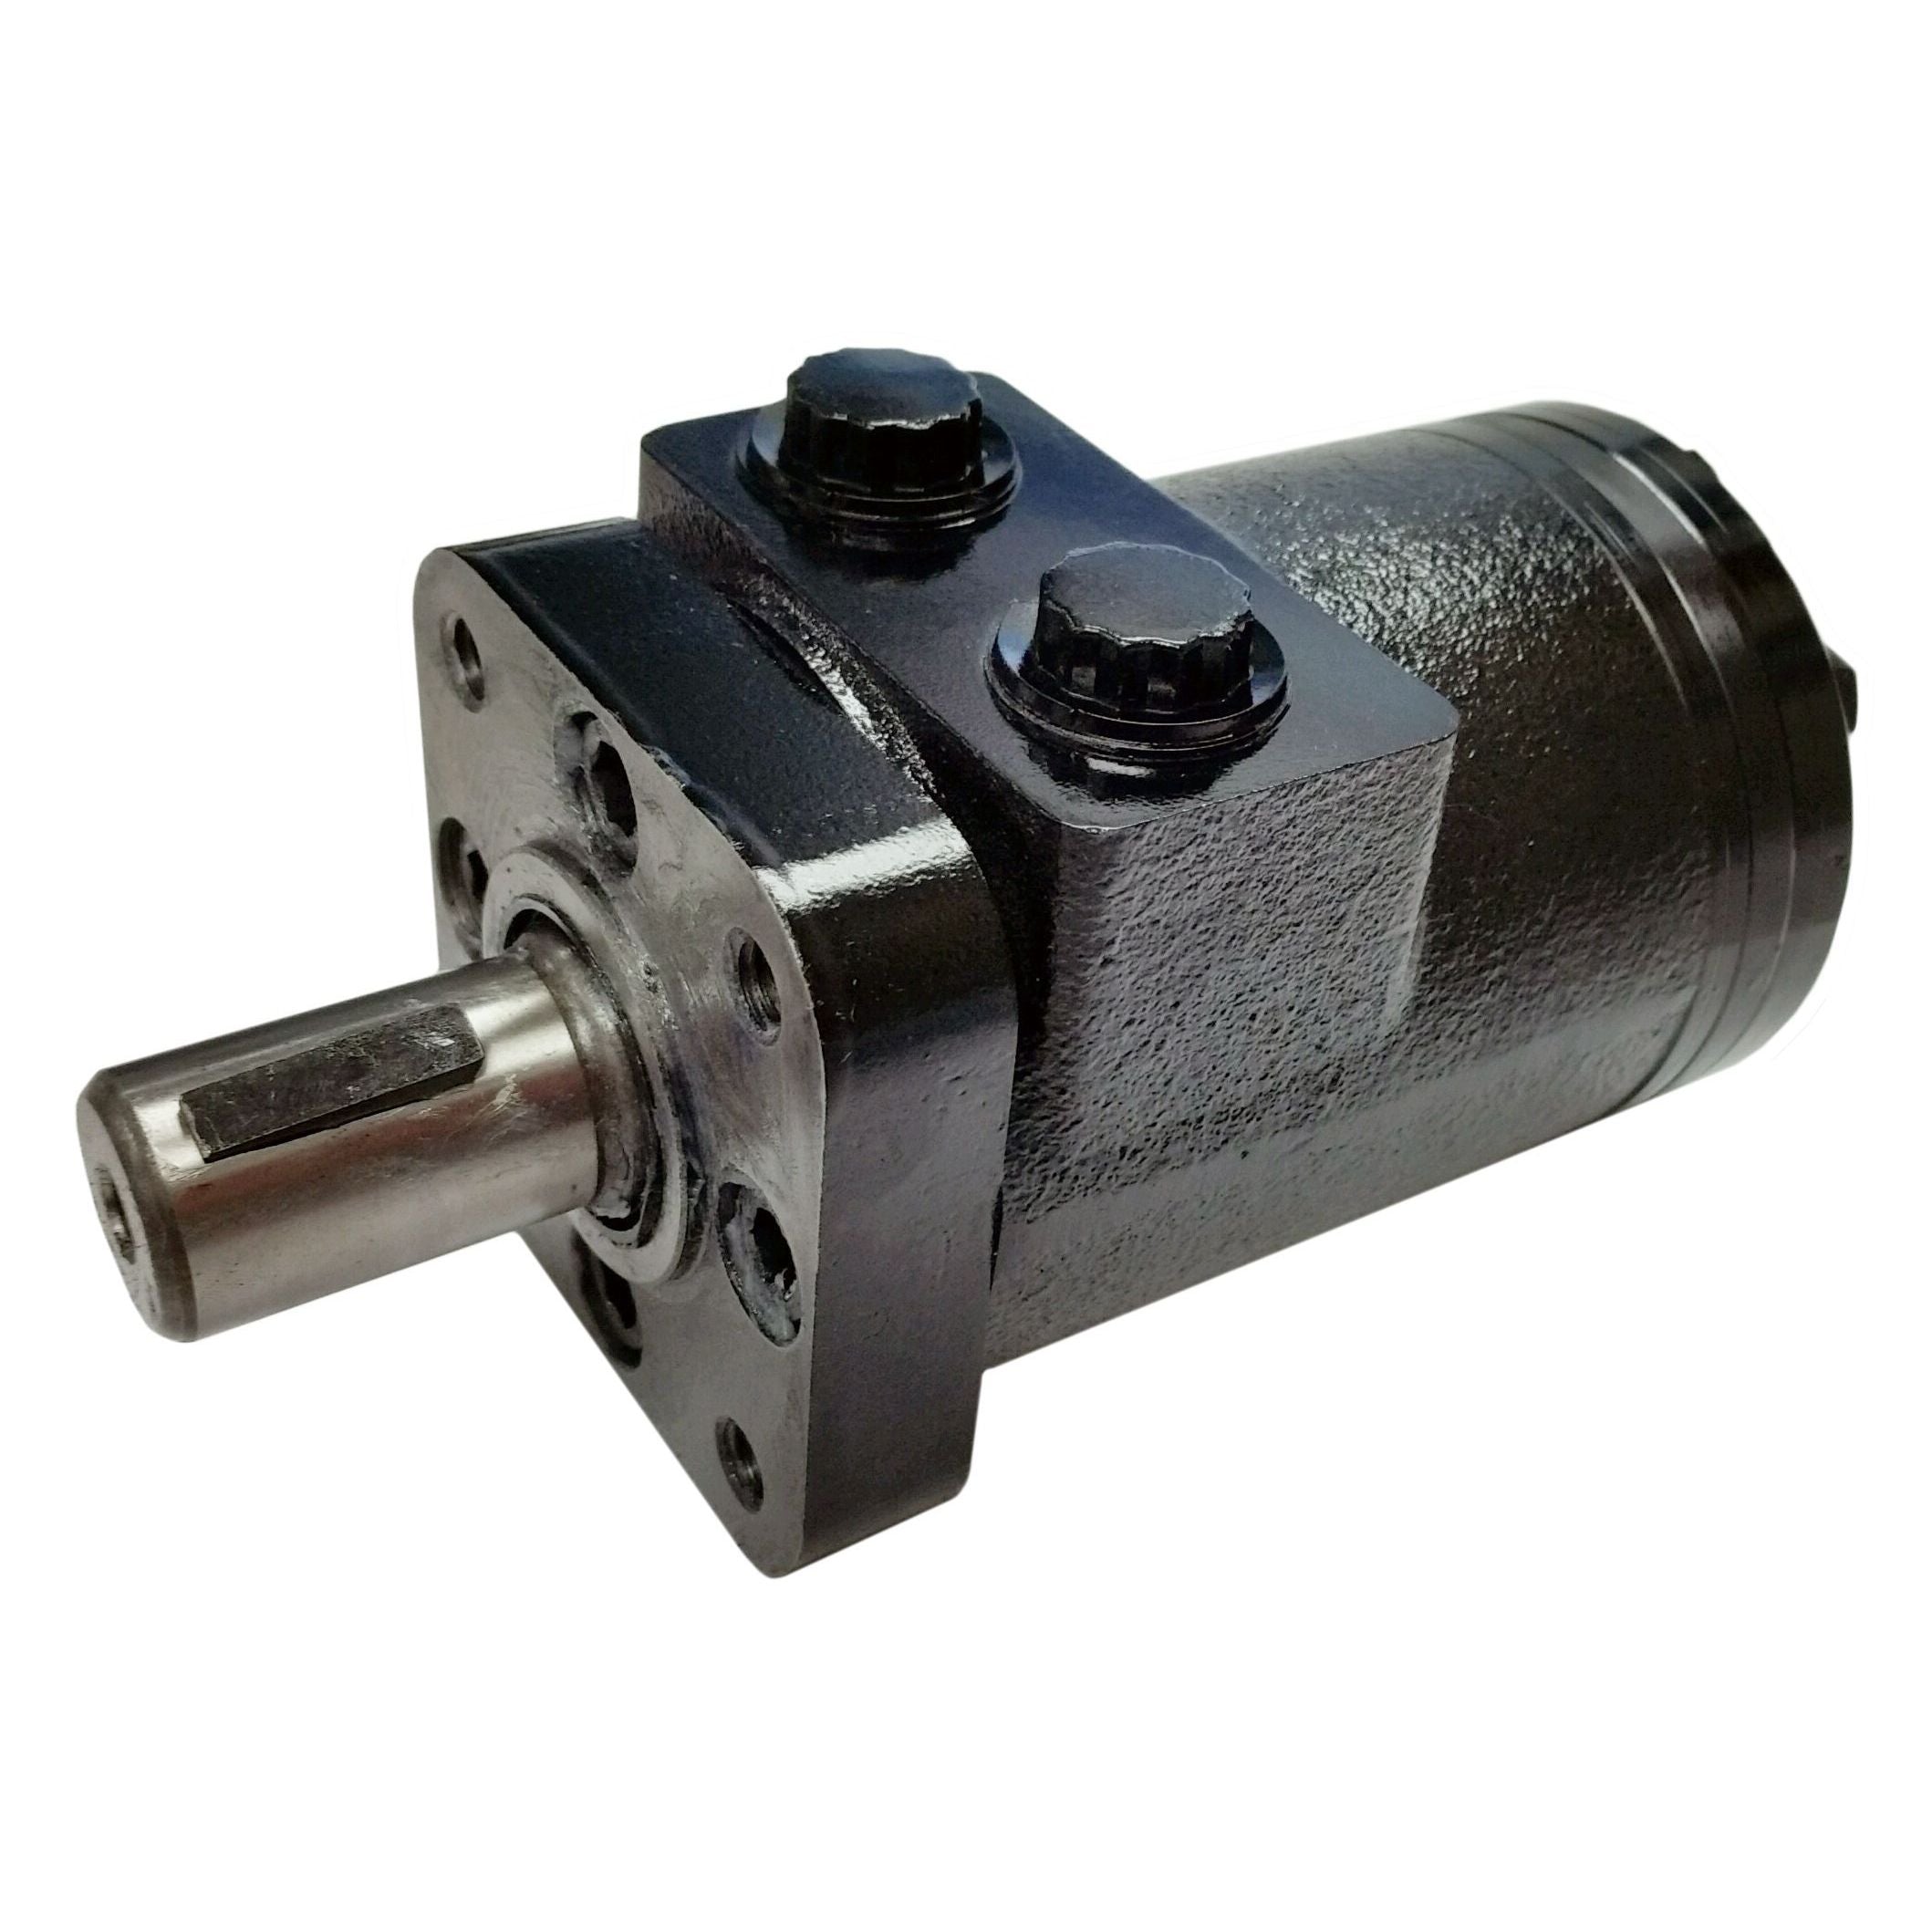 BMPH-160-H4-S-P : Dynamic LSHT Motor, 157cc, 383RPM, 2673in-lb, 2031psi Differential, 15.85GPM, SAE A 4-Bolt Mount, 6-Tooth Shaft, Side Ported, 1/2" NPT